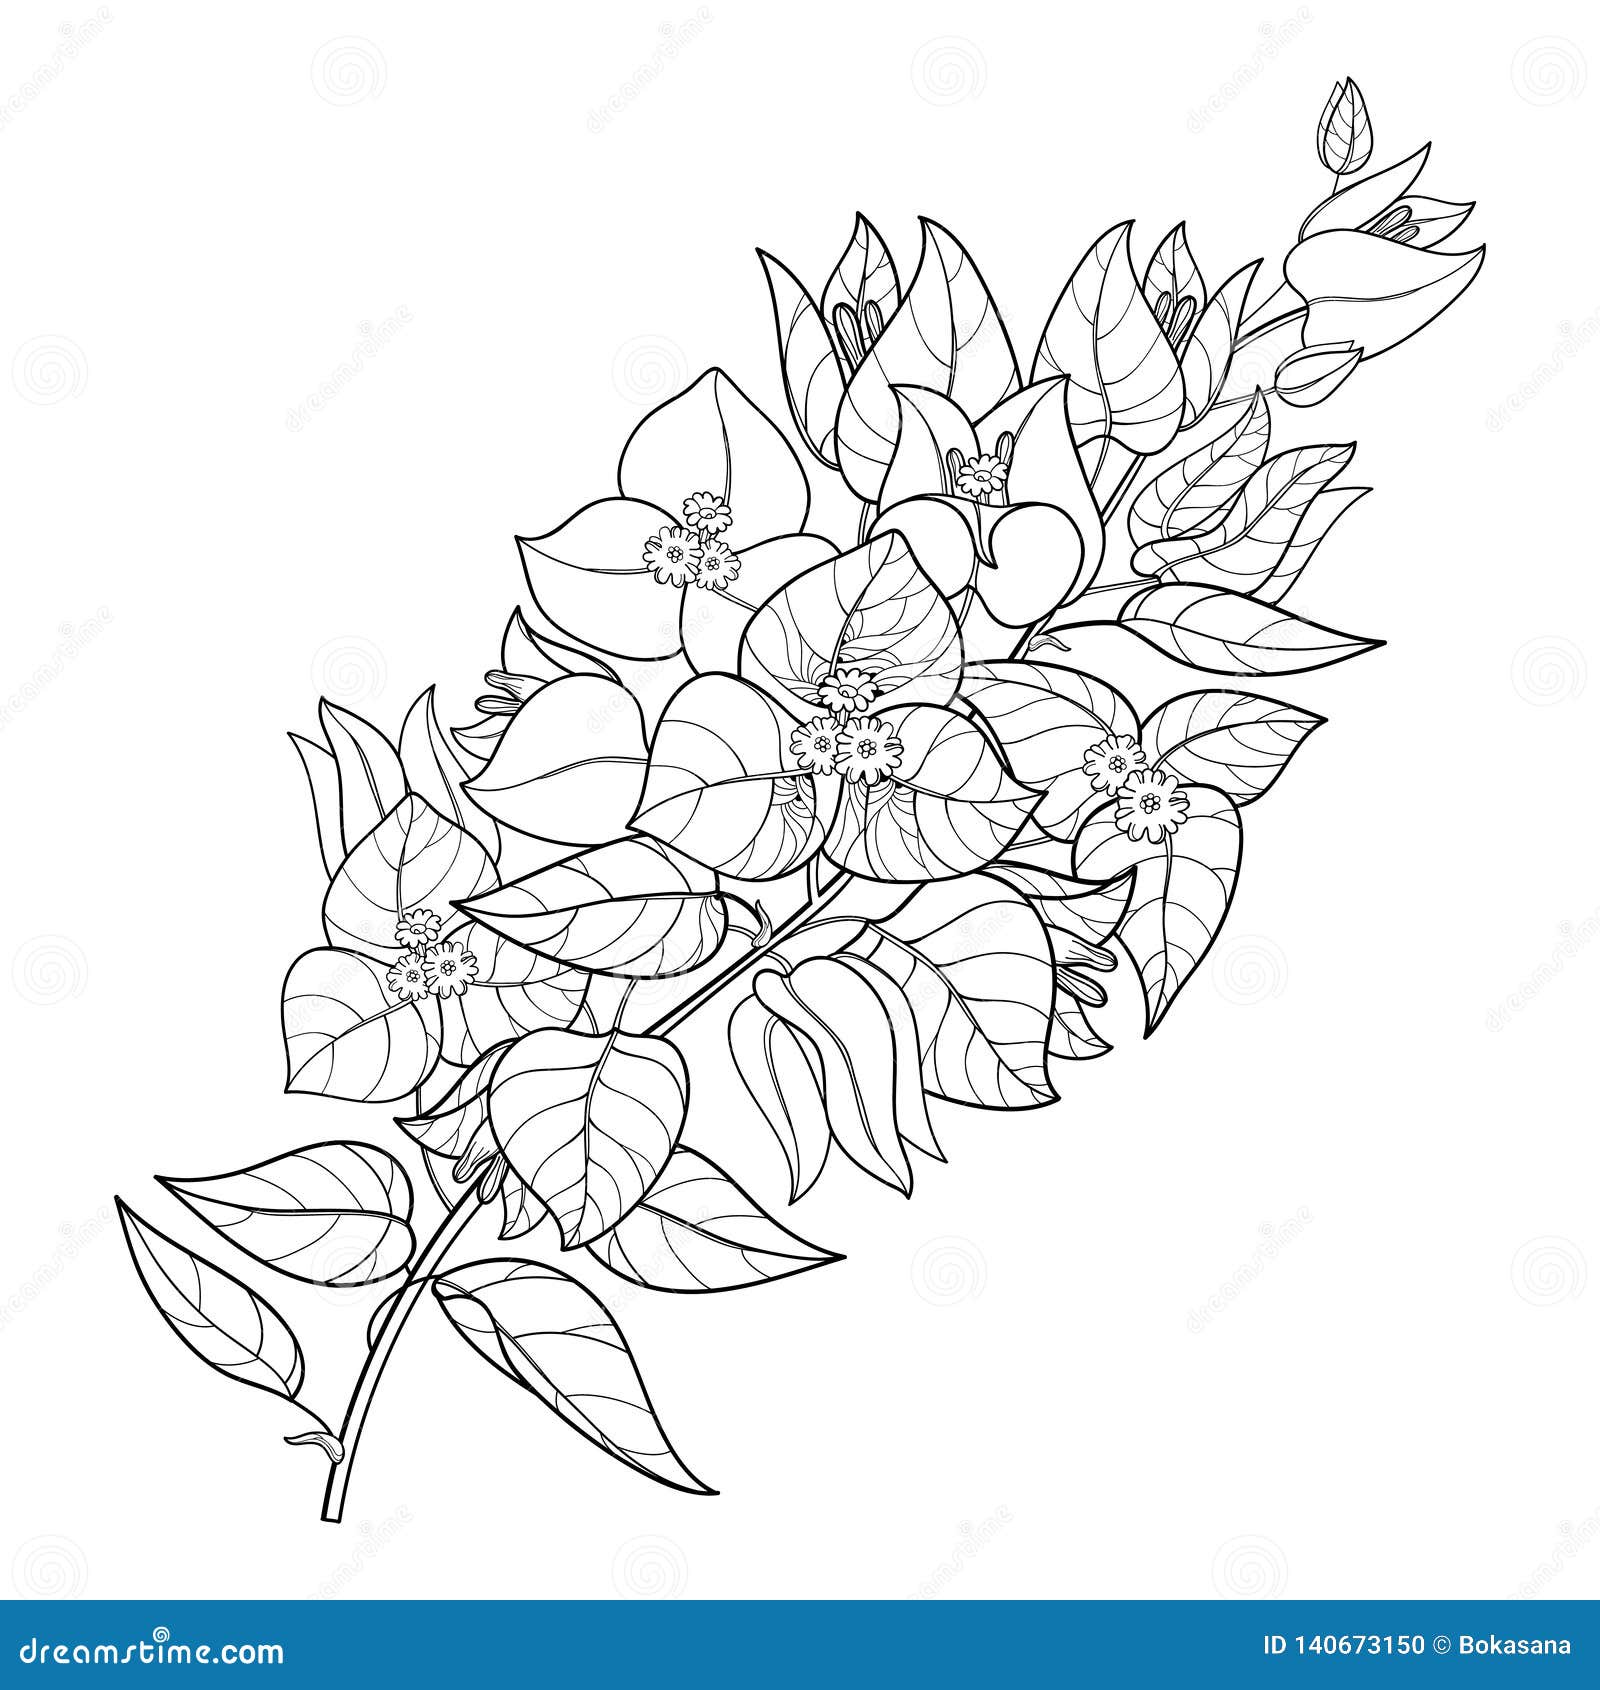  outline bougainvillea or buganvilla flower bunch with bud and leaf in black  on white background.